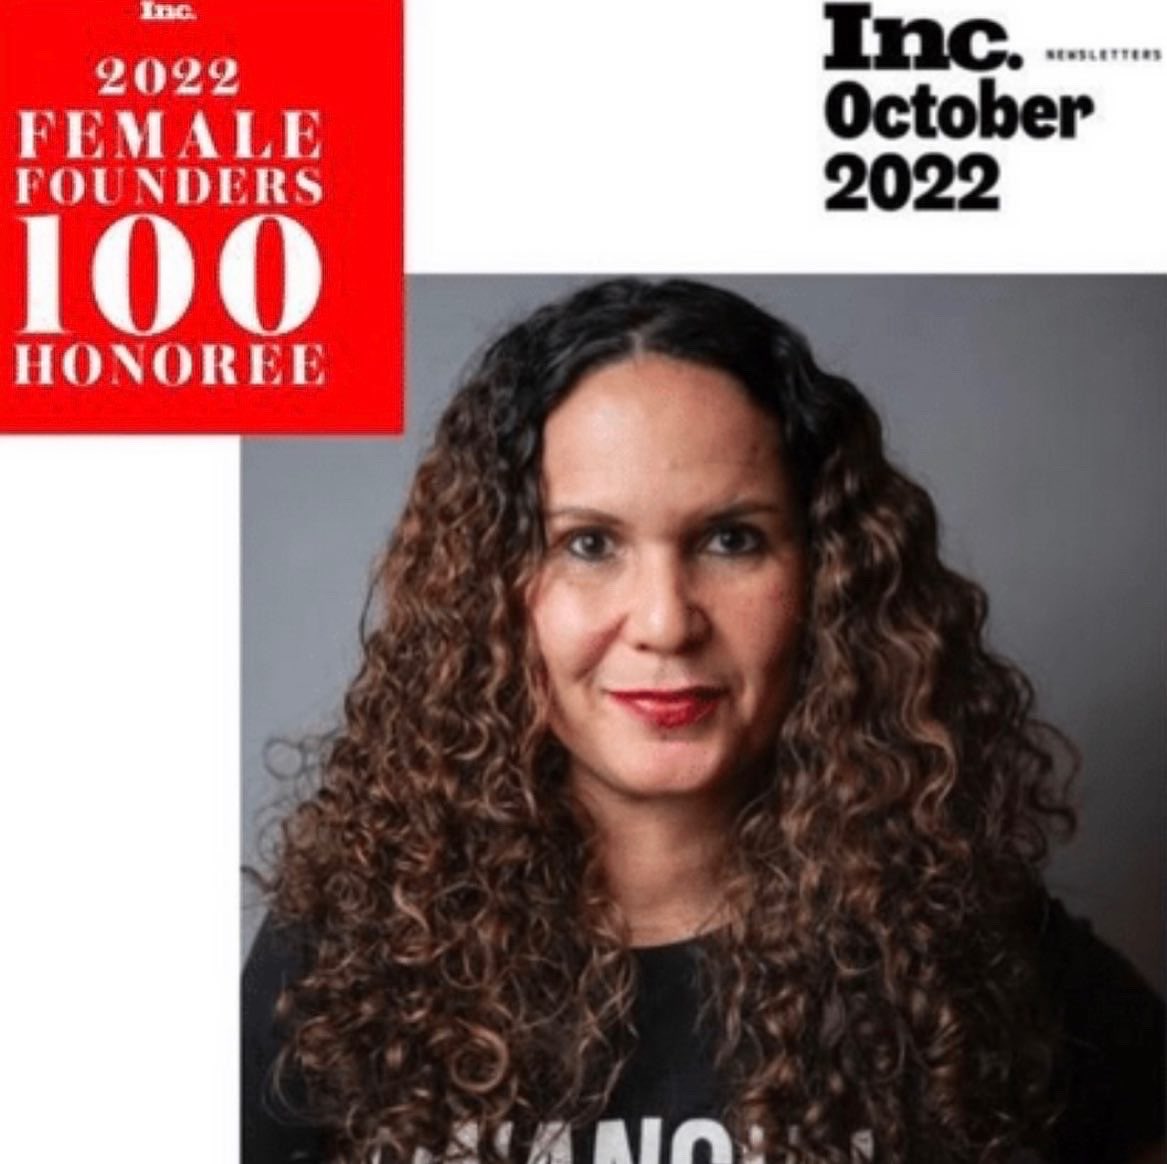 Our CEO and fearless leader, @tvancourt was named by @Inc Magazine to its 2022 100 Female Founders list. She is listed among some pretty extraordinary and phenomenal women entrepreneurs and we are here to tell you that she is 1000 percent deserving of this recognition. #FinTech